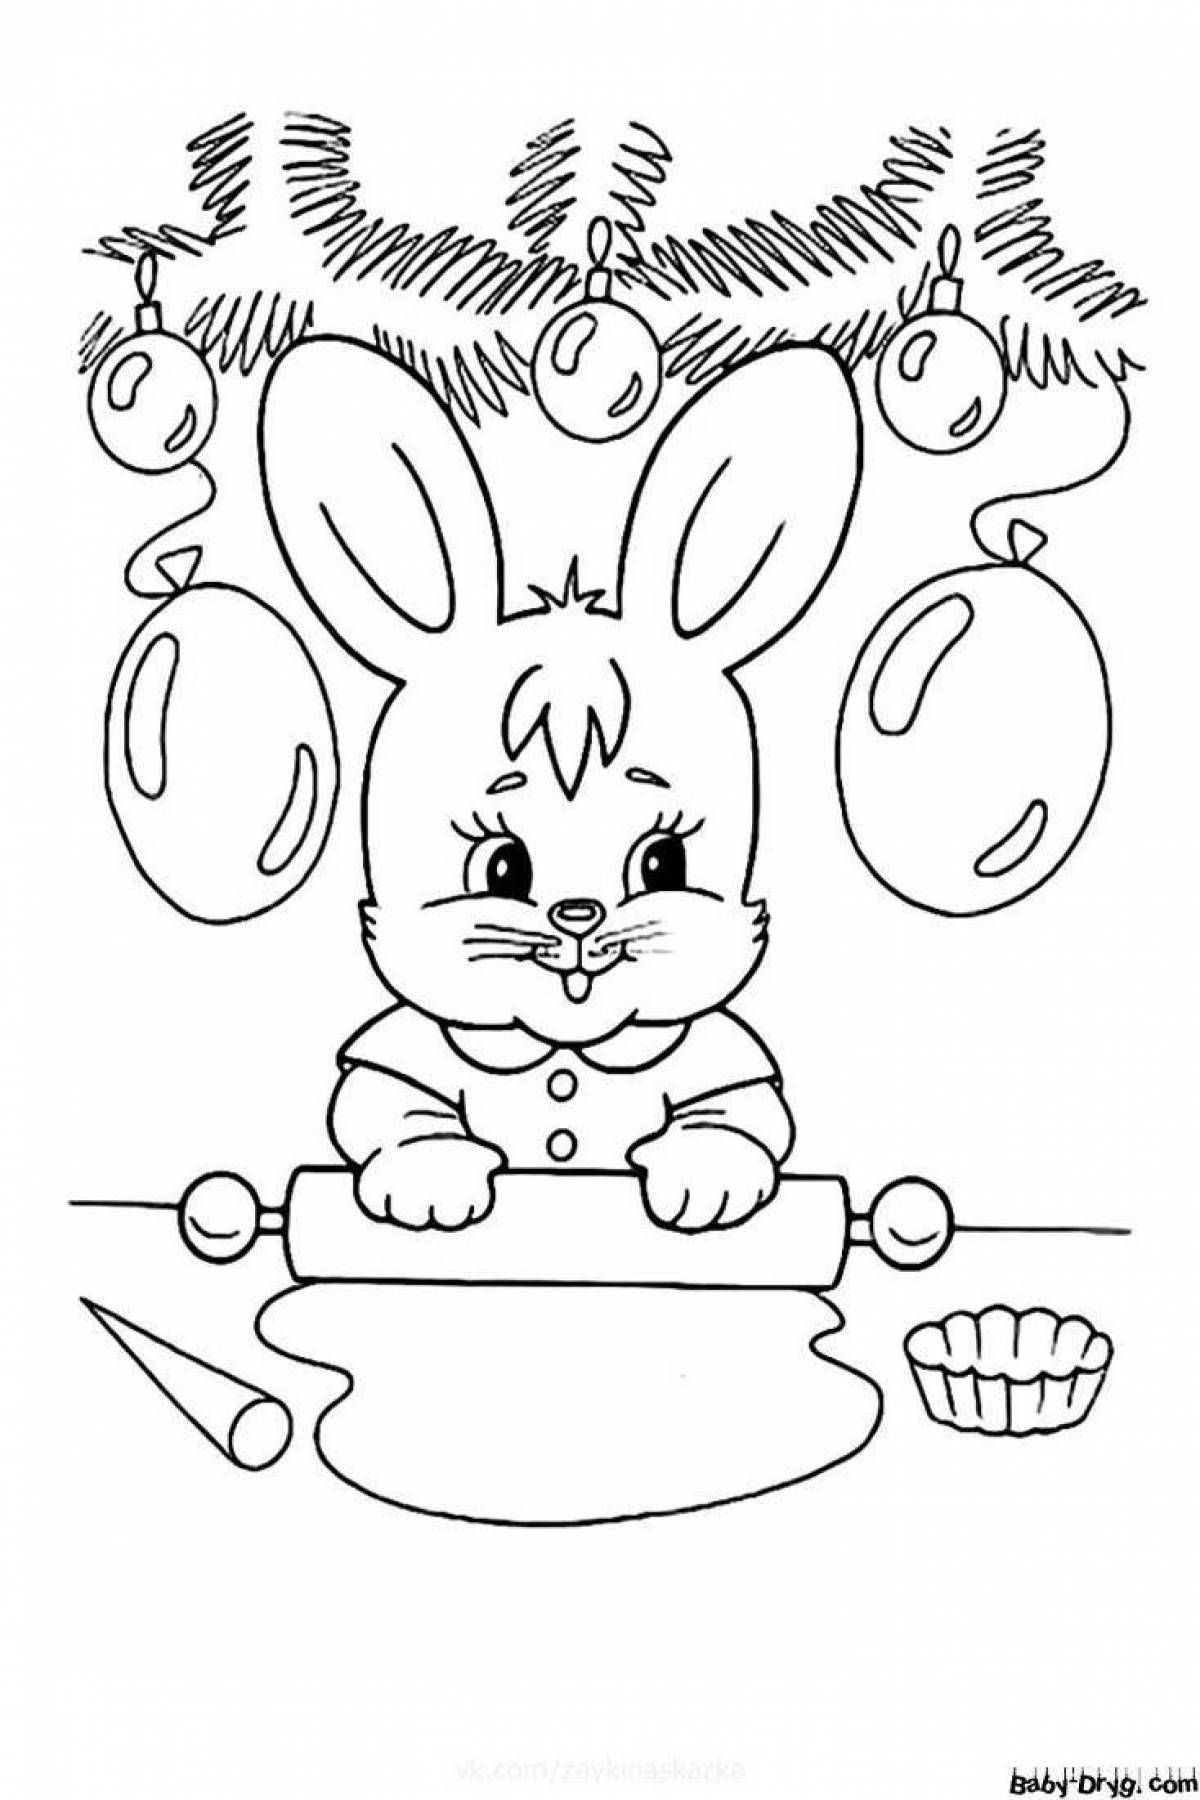 Colorful rabbit year coloring page